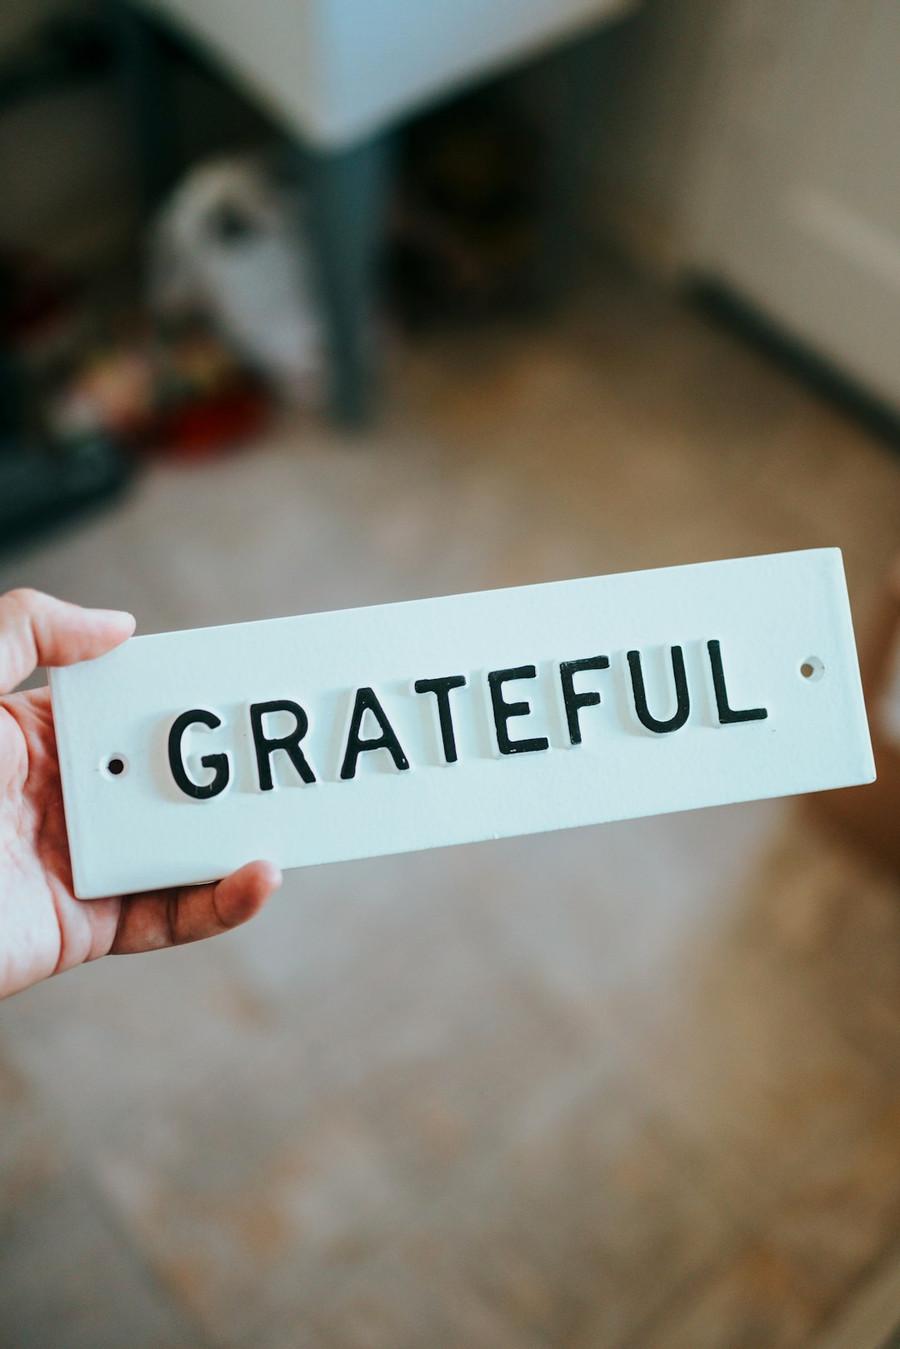 2. Force yourself to practice gratitude.